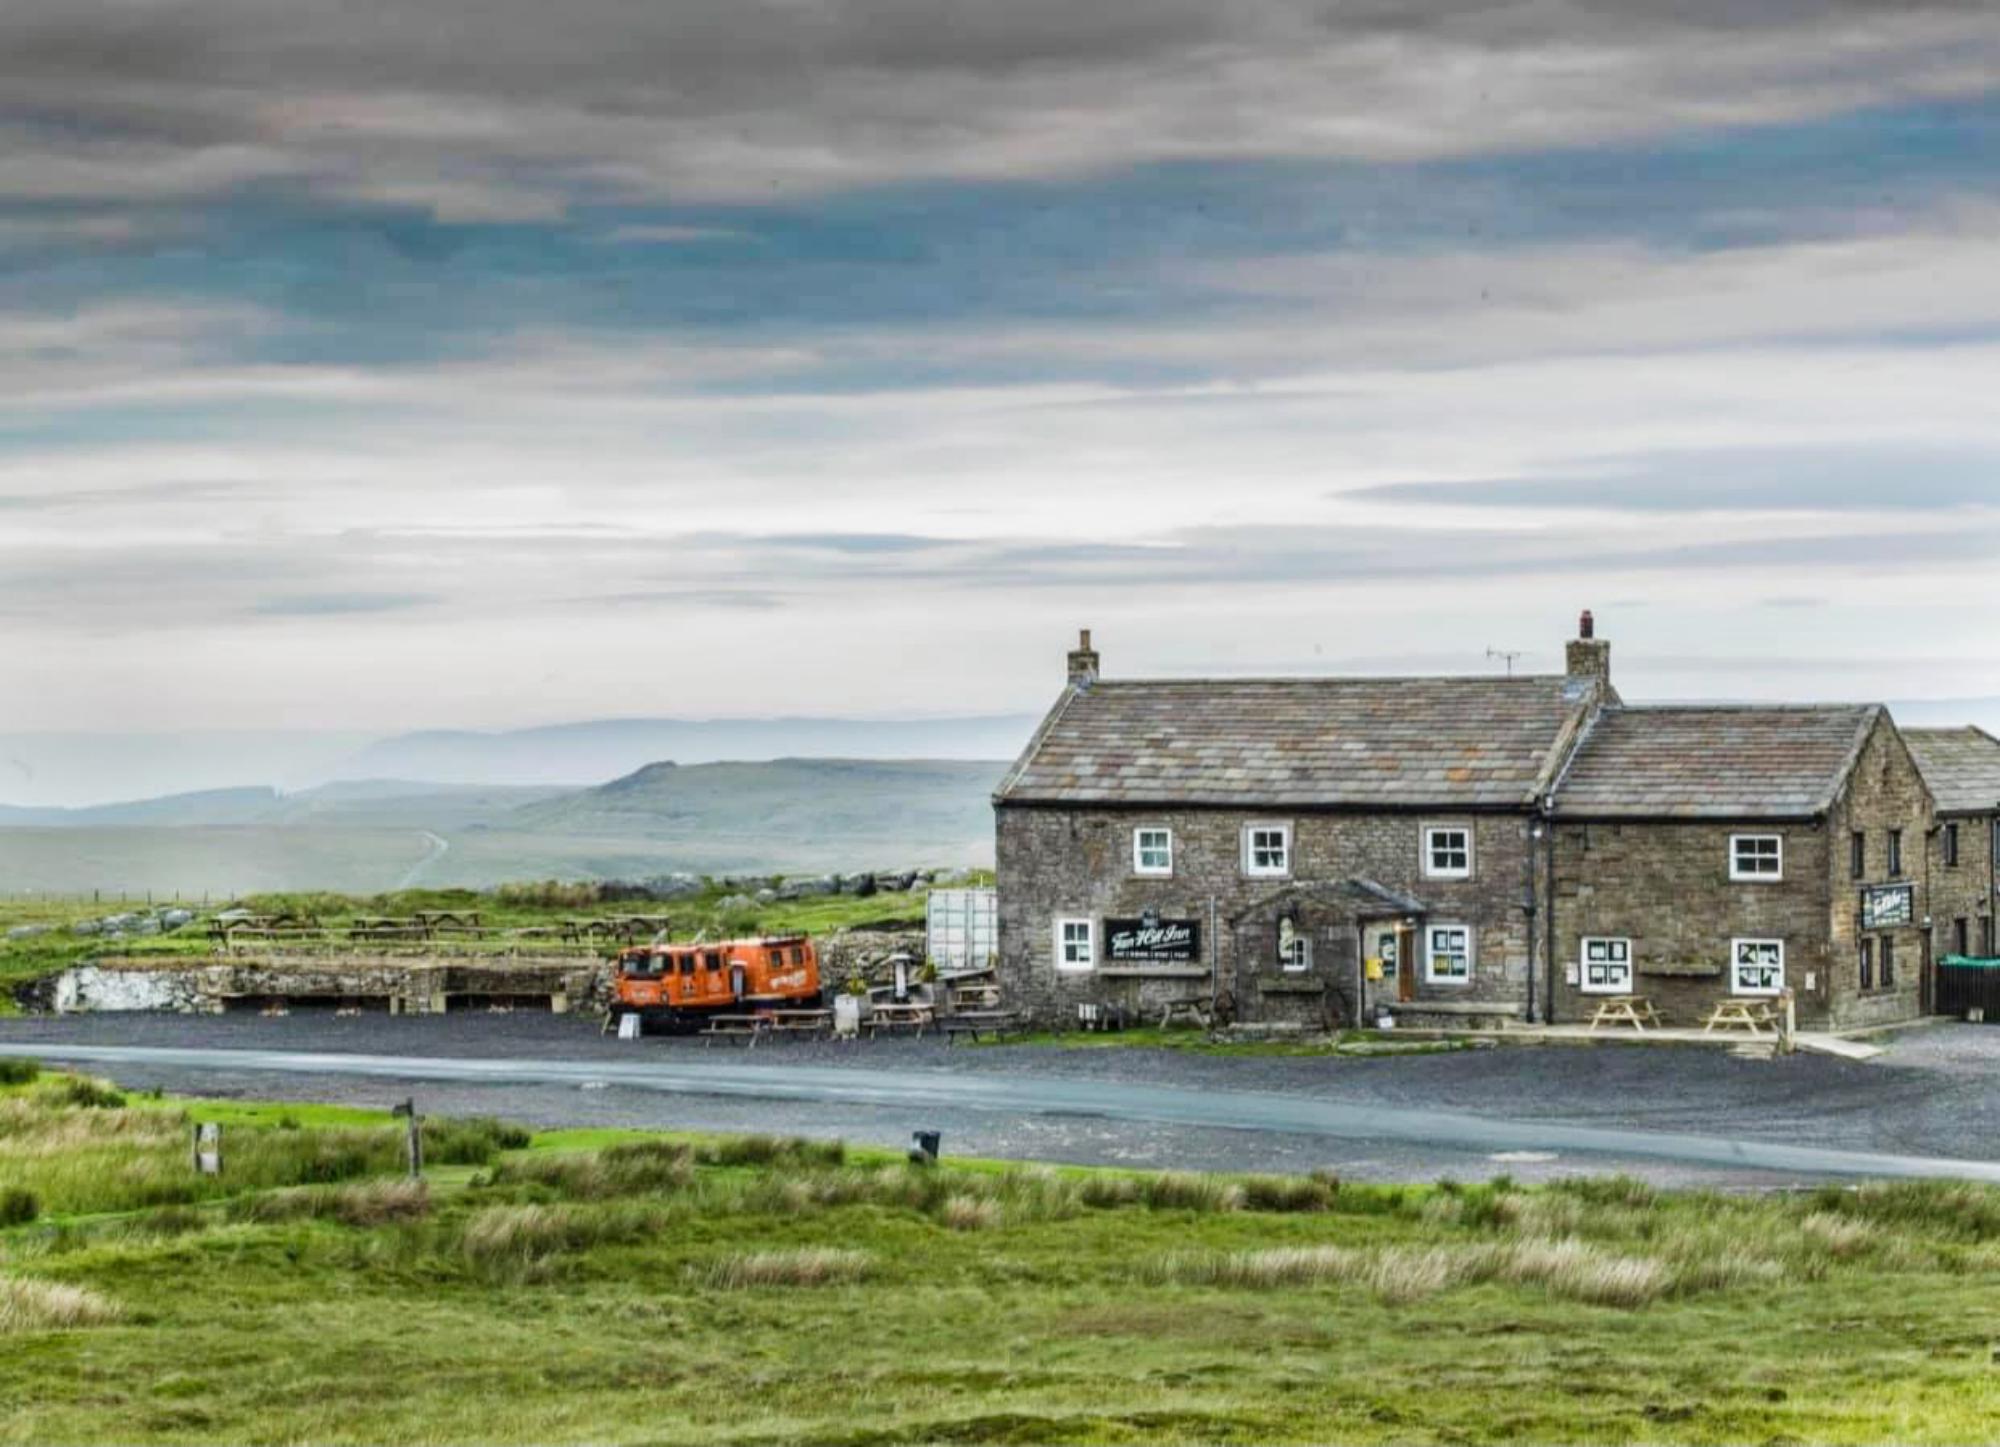 Hotels in Reeth holidays at Cool Places